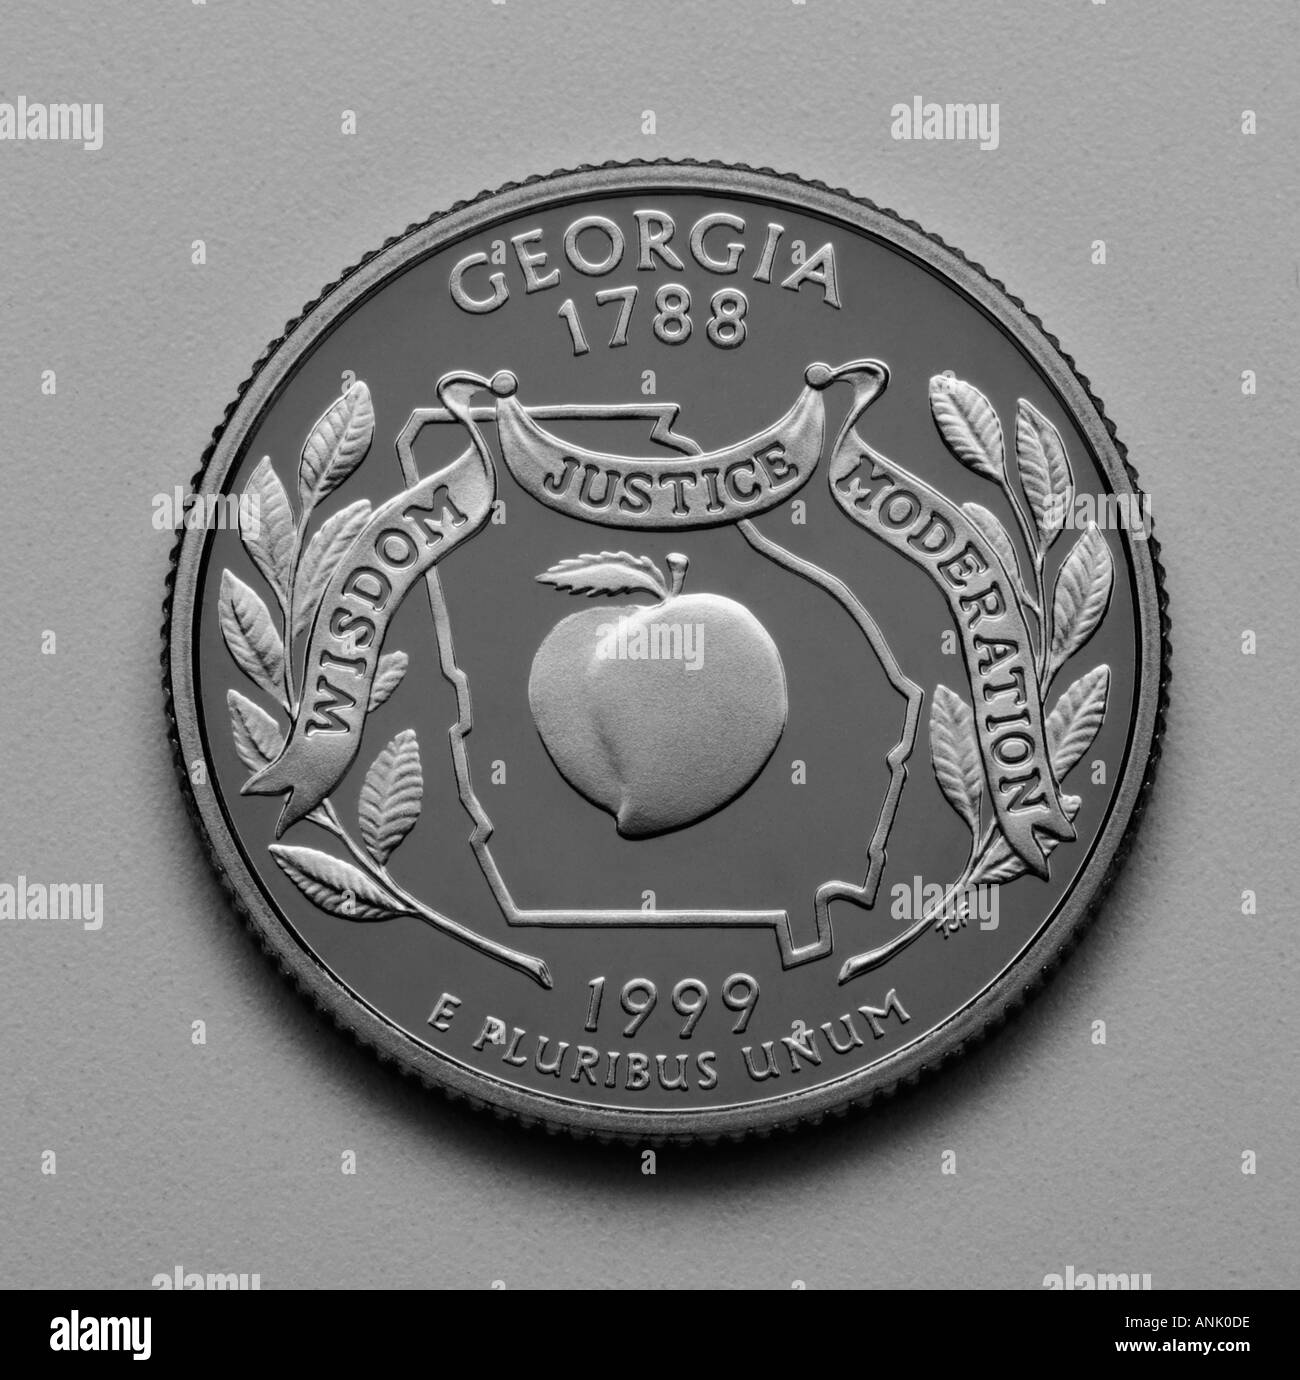 U S state quarters coin collection in book Stock Photo - Alamy